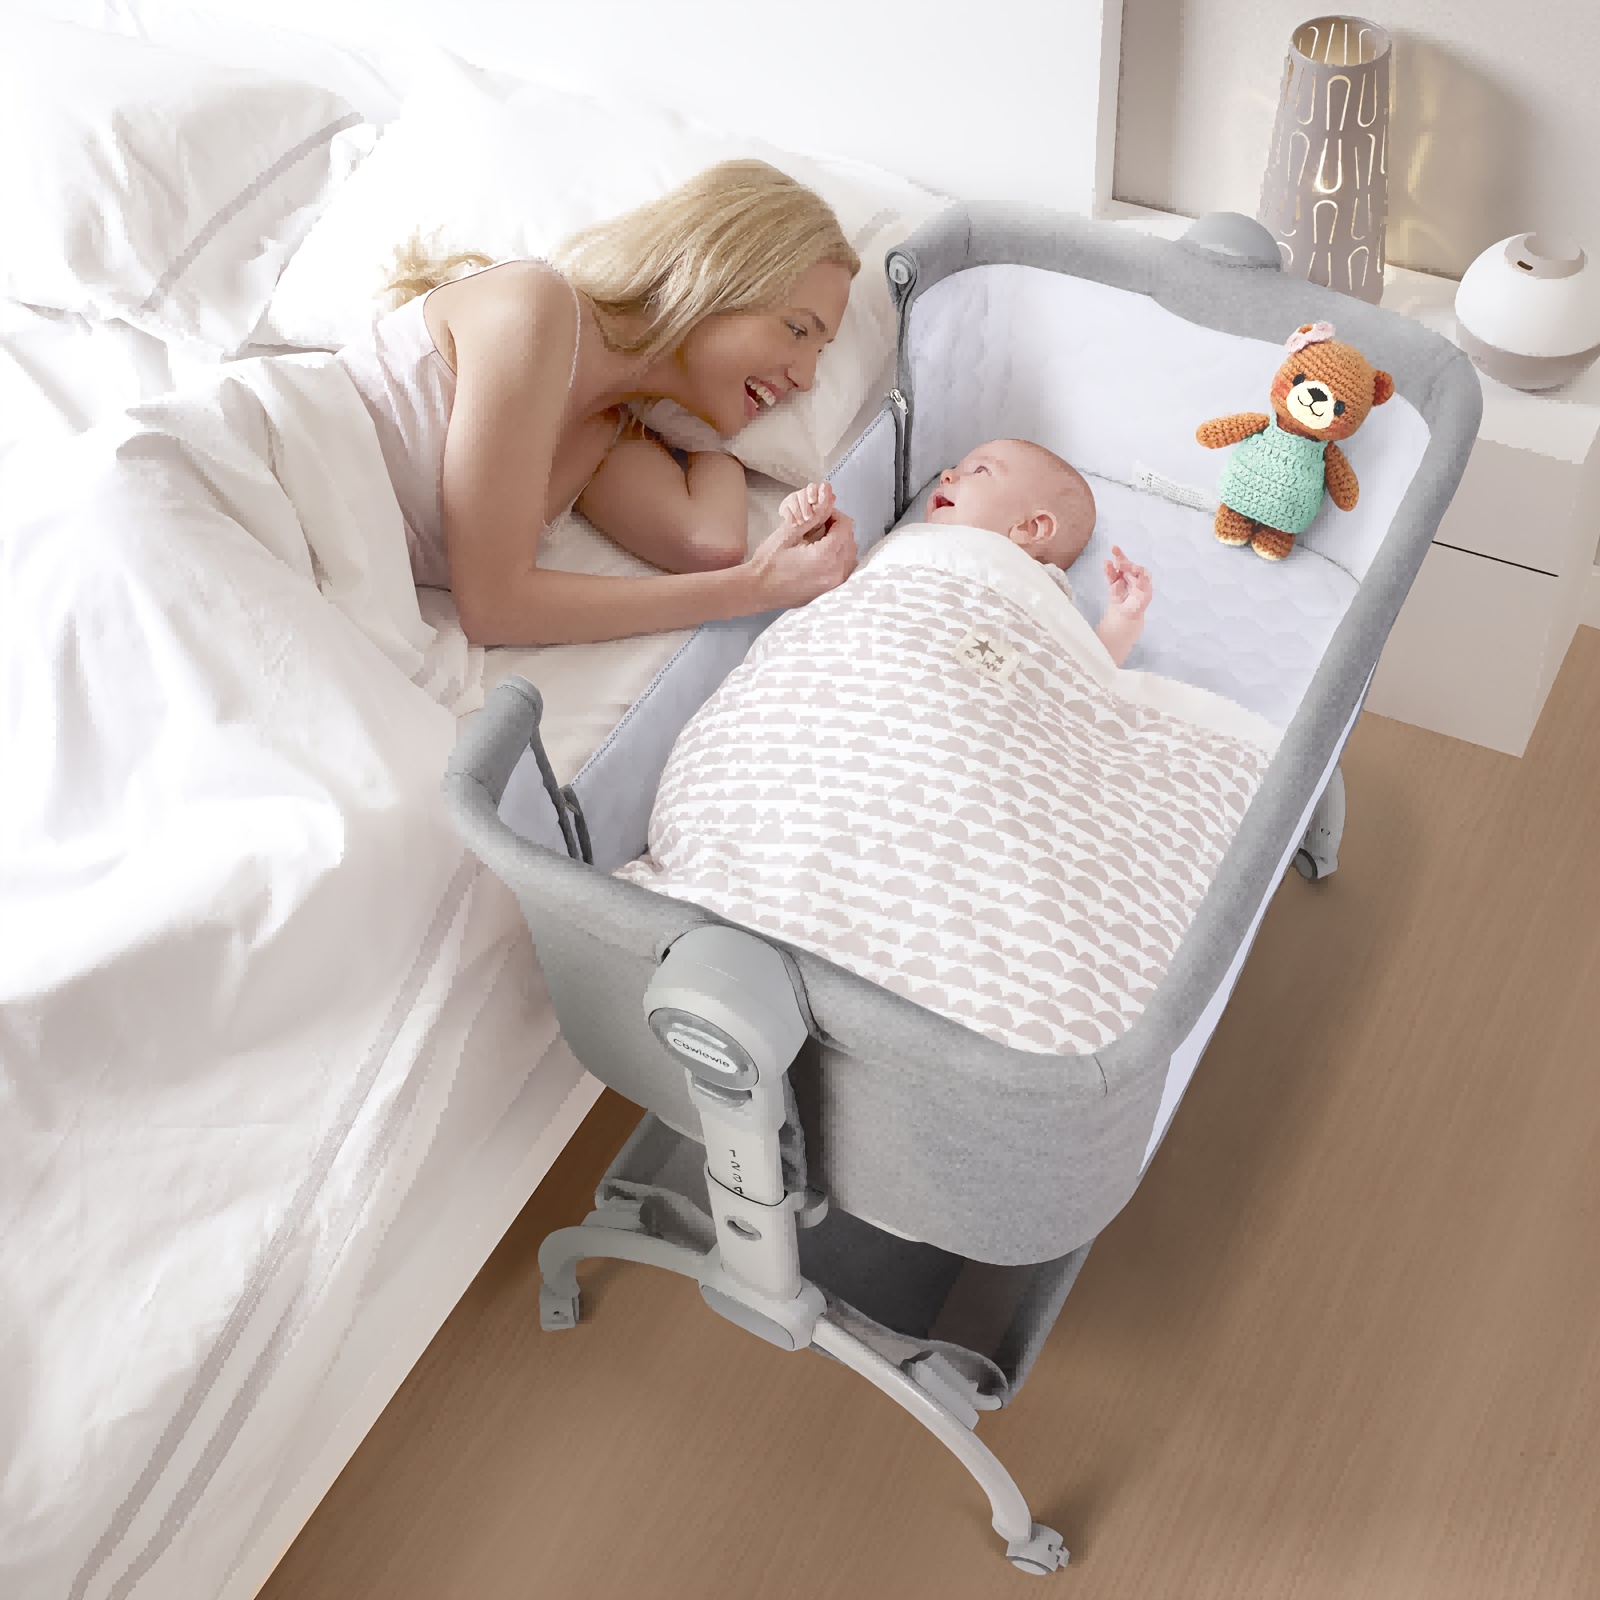 

Baby Bassinet With Wheels And Double-lock Patent Design, Bedside Sleeper With Storage Basket And Mattress, 7 Height Adjustable Easy Folding Portable Bedside Crib For Newborn Infant